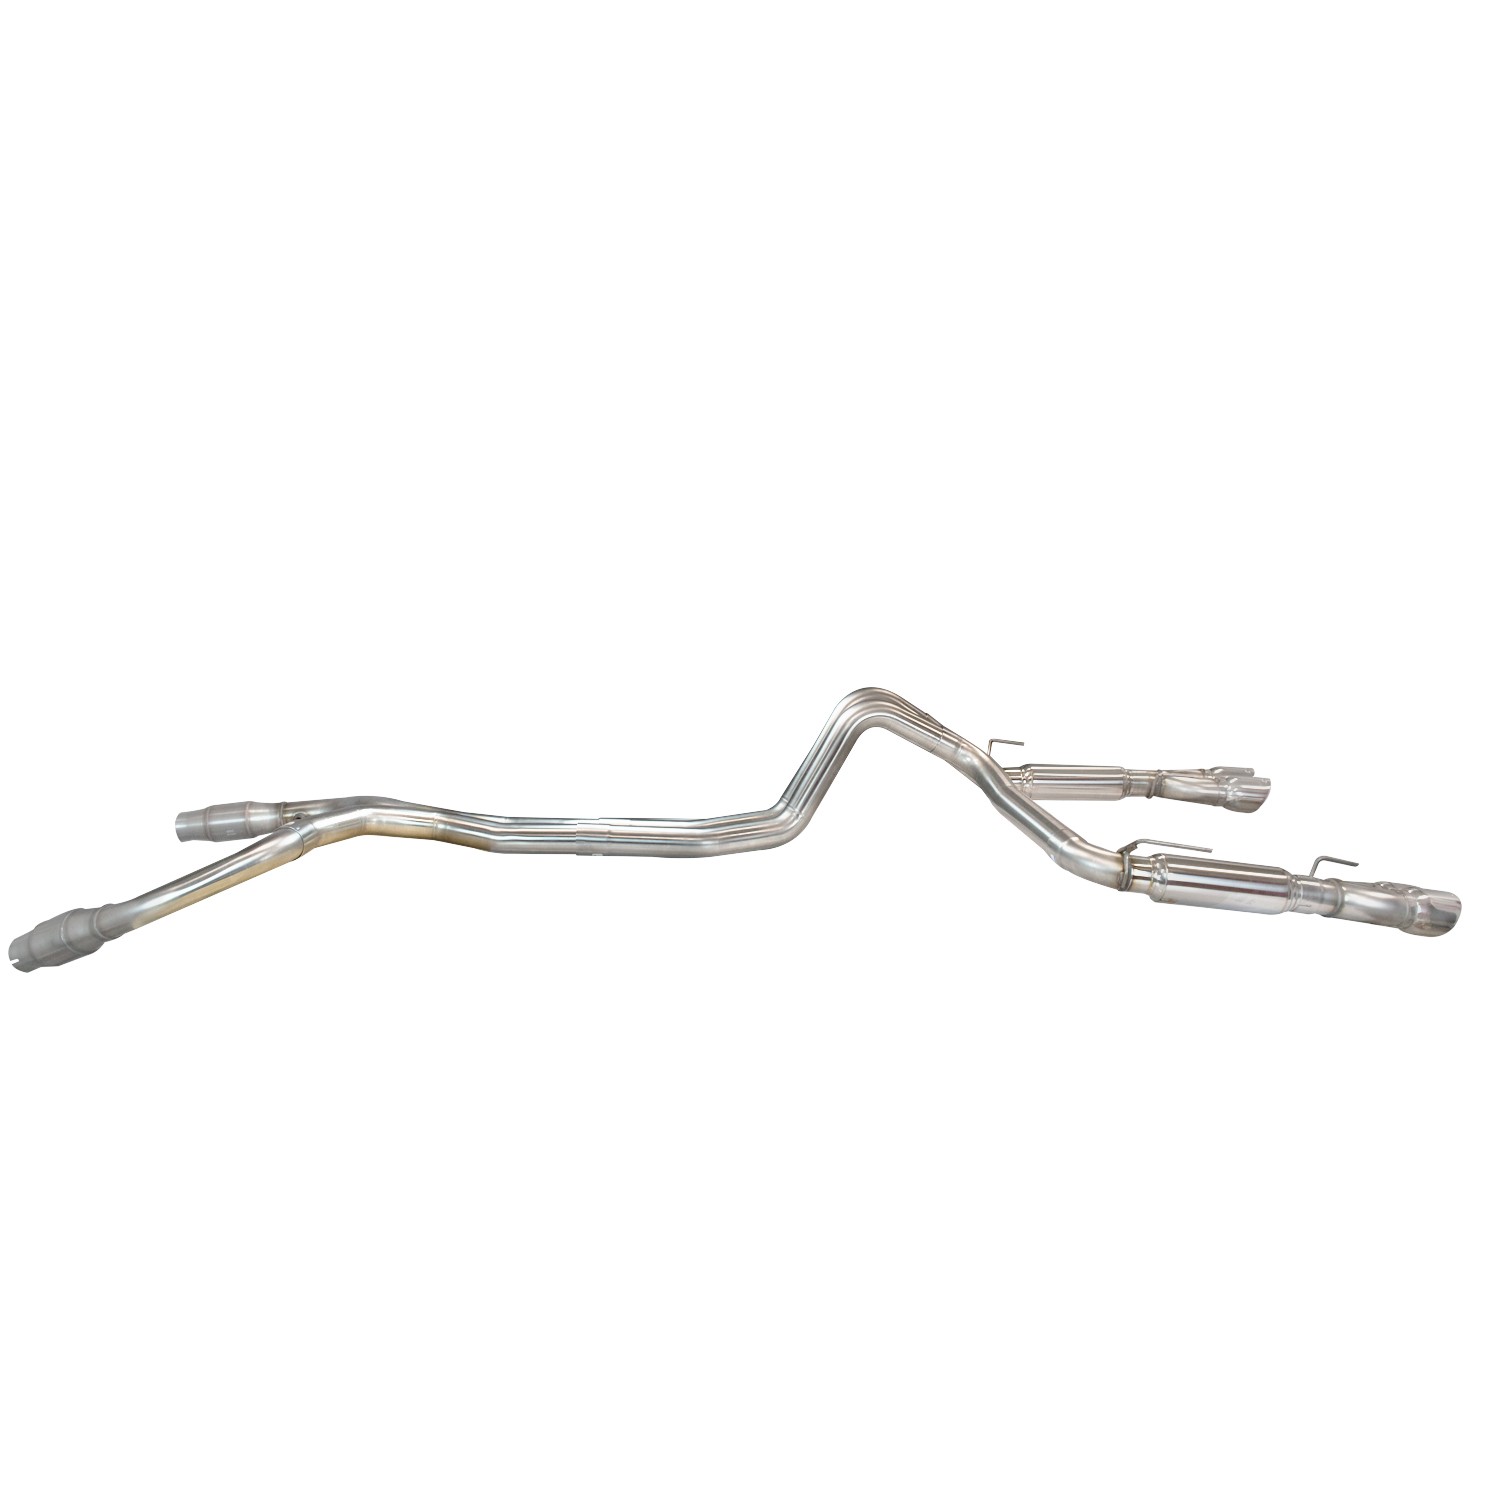 True Dual Exhaust System 3" Catted Incl. 3 x Pipe w/Pol. Race Mufflers/Quad Pol. 4" Tips-Firebird